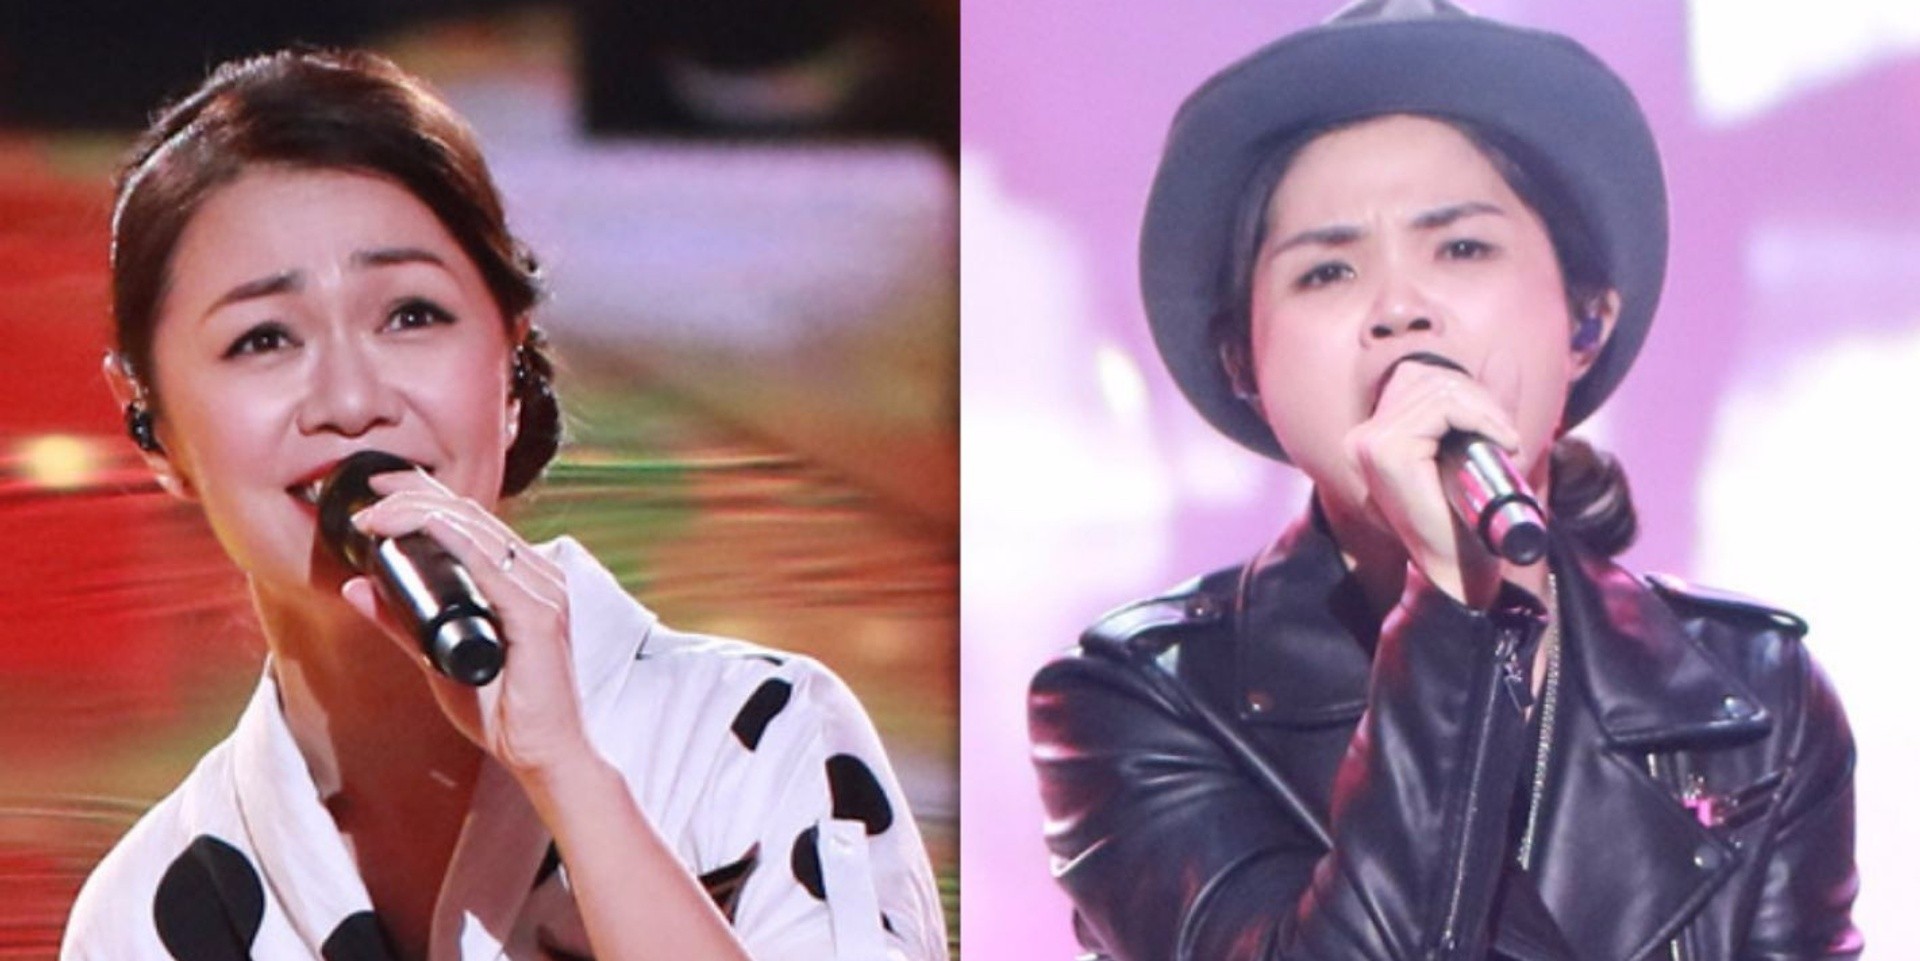 Singaporean finalists to go head-to-head on Sing! China